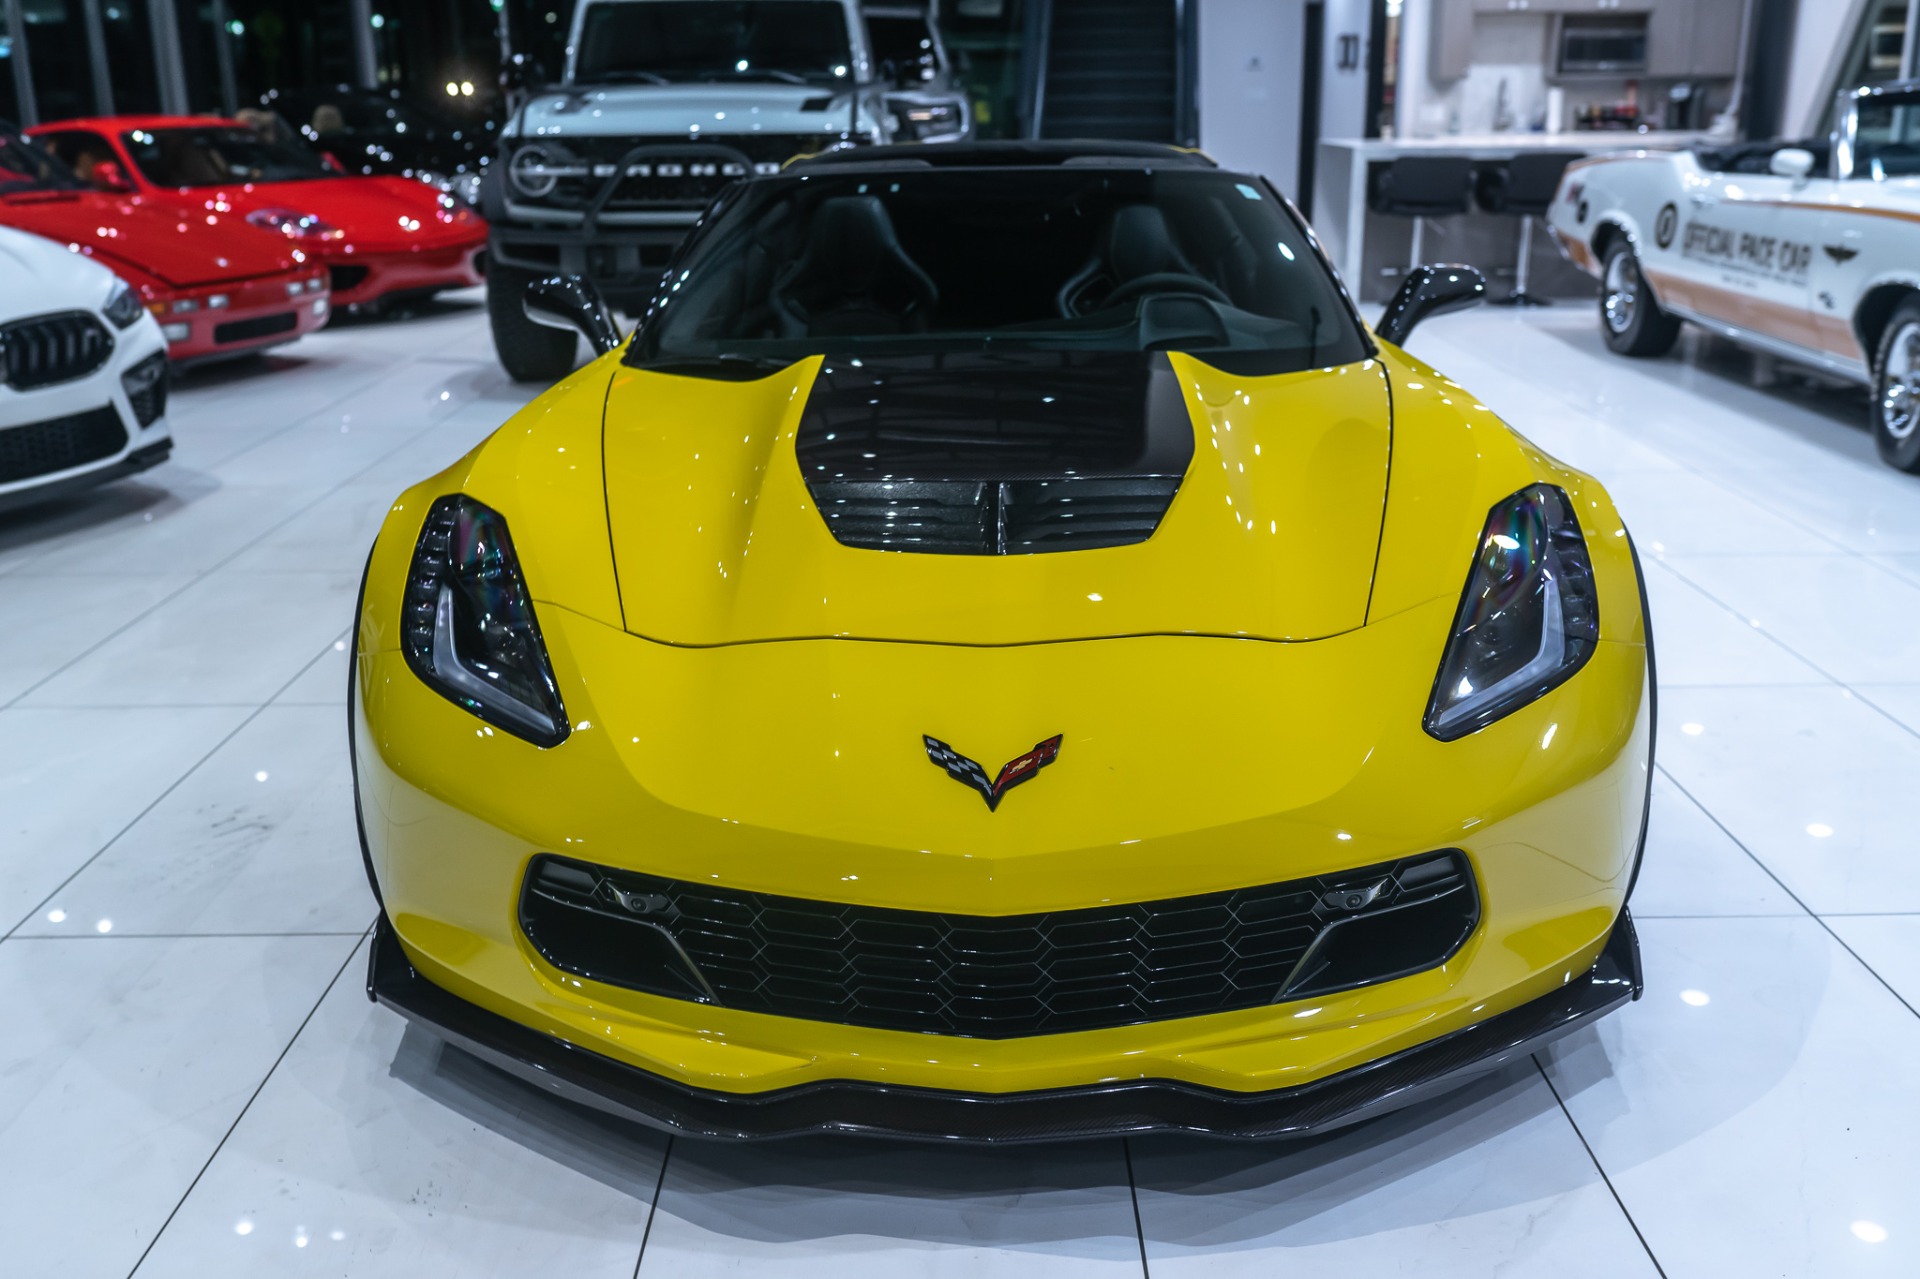 Used-2016-Chevrolet-Corvette-Z06-LOADED-3LZ-1-OWNER-CLEAN-CARFAX-GORGEOUS-RACING-YELLOW